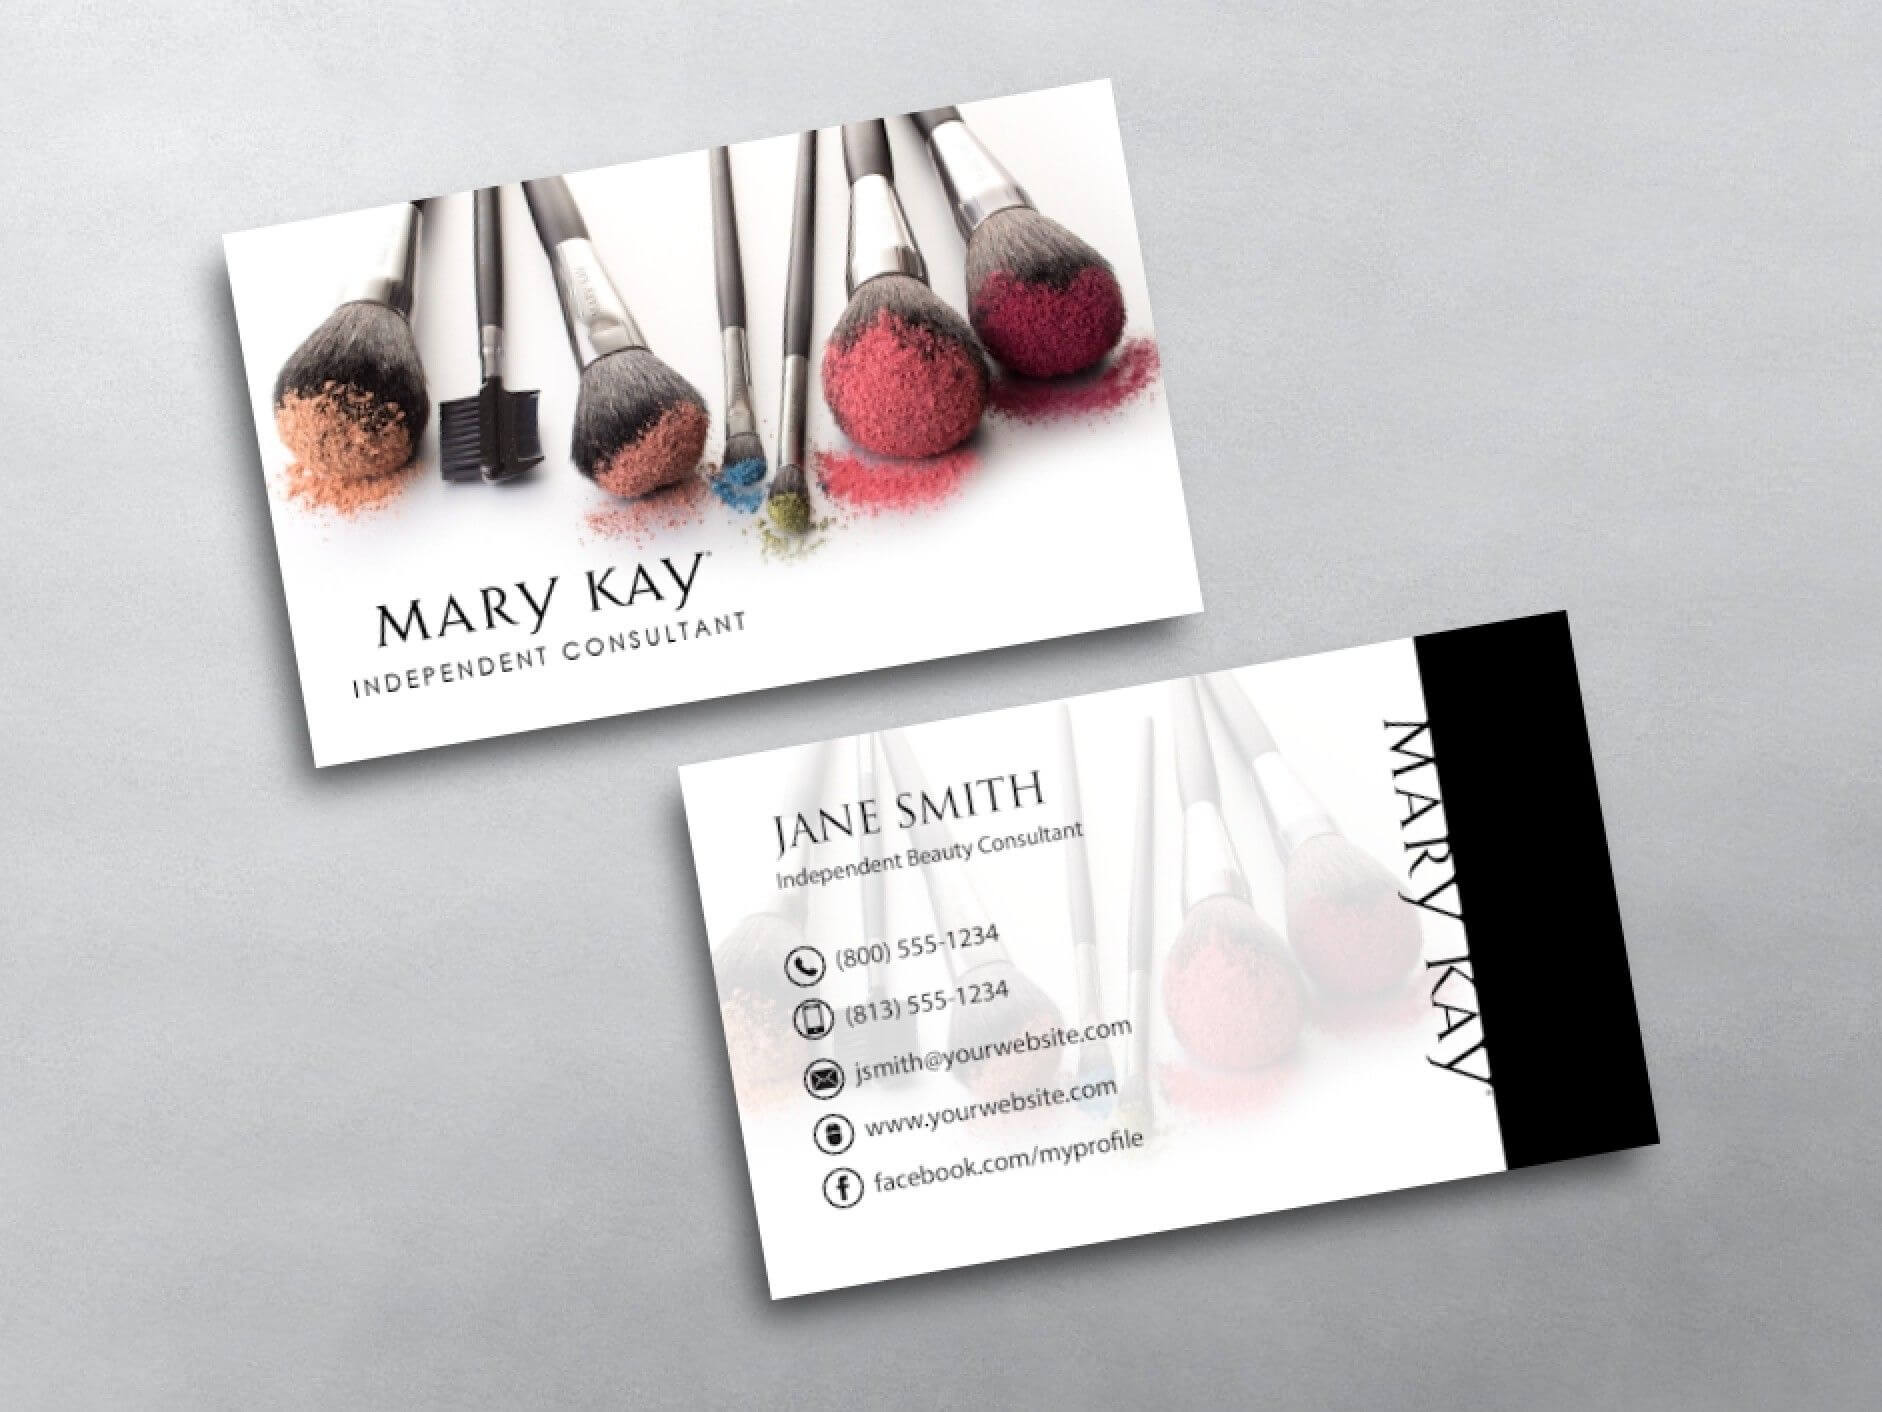 Mary Kay Business Cards In 2019 | Mary Kay, Makeup Artist With Mary Kay Business Cards Templates Free